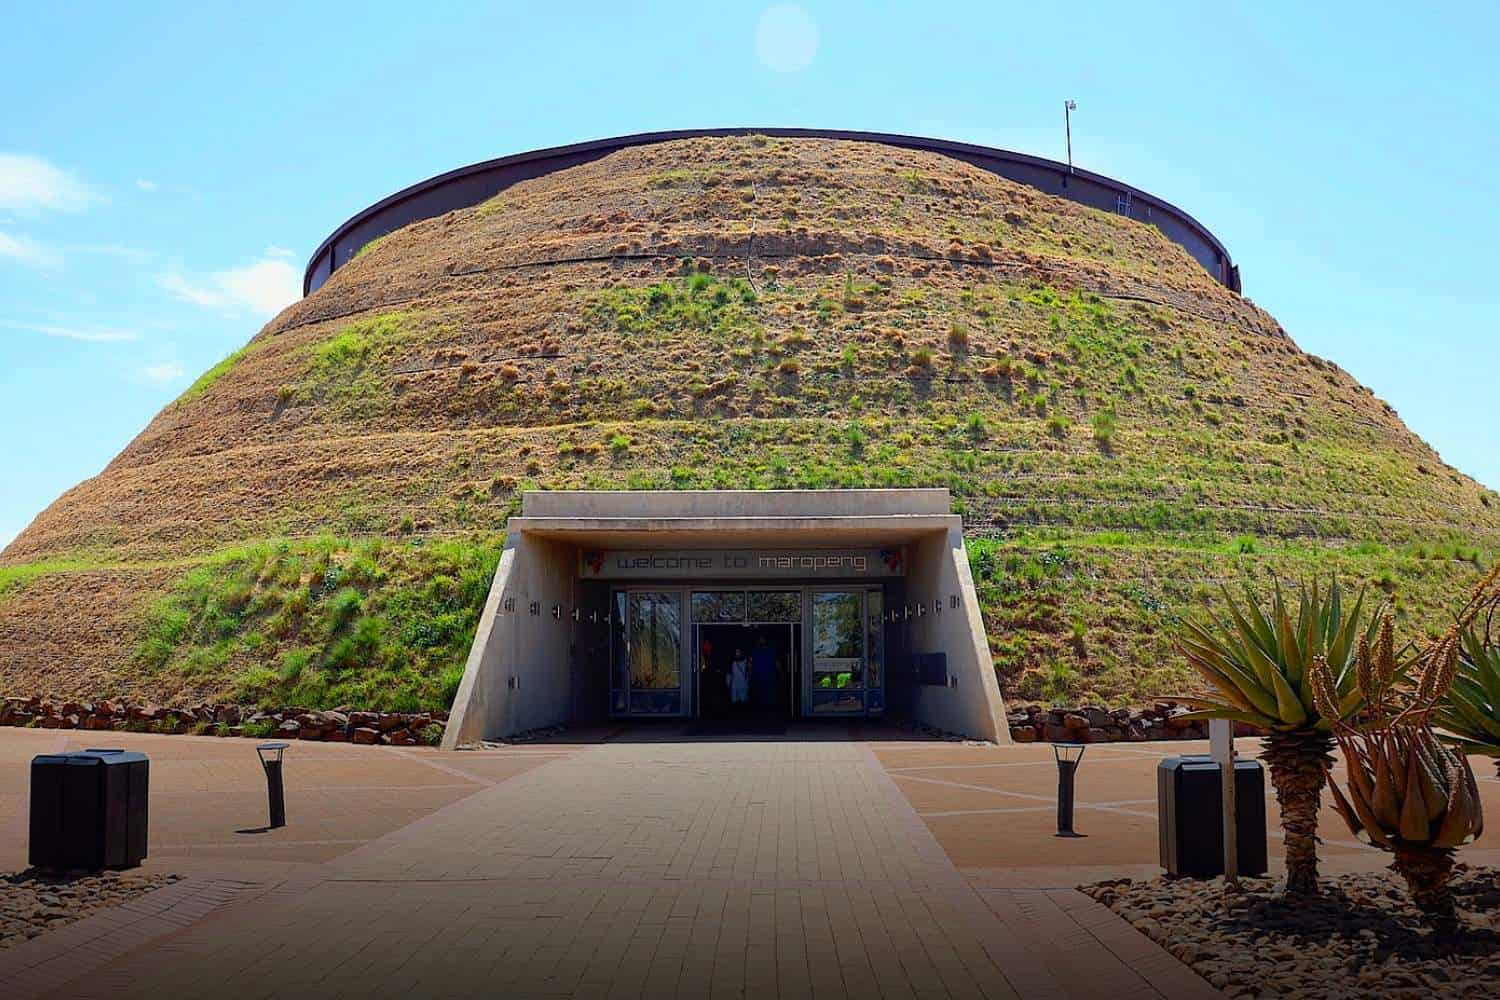 gauteng travel guide when to visit places to visit safety suggestions cradle of humankind